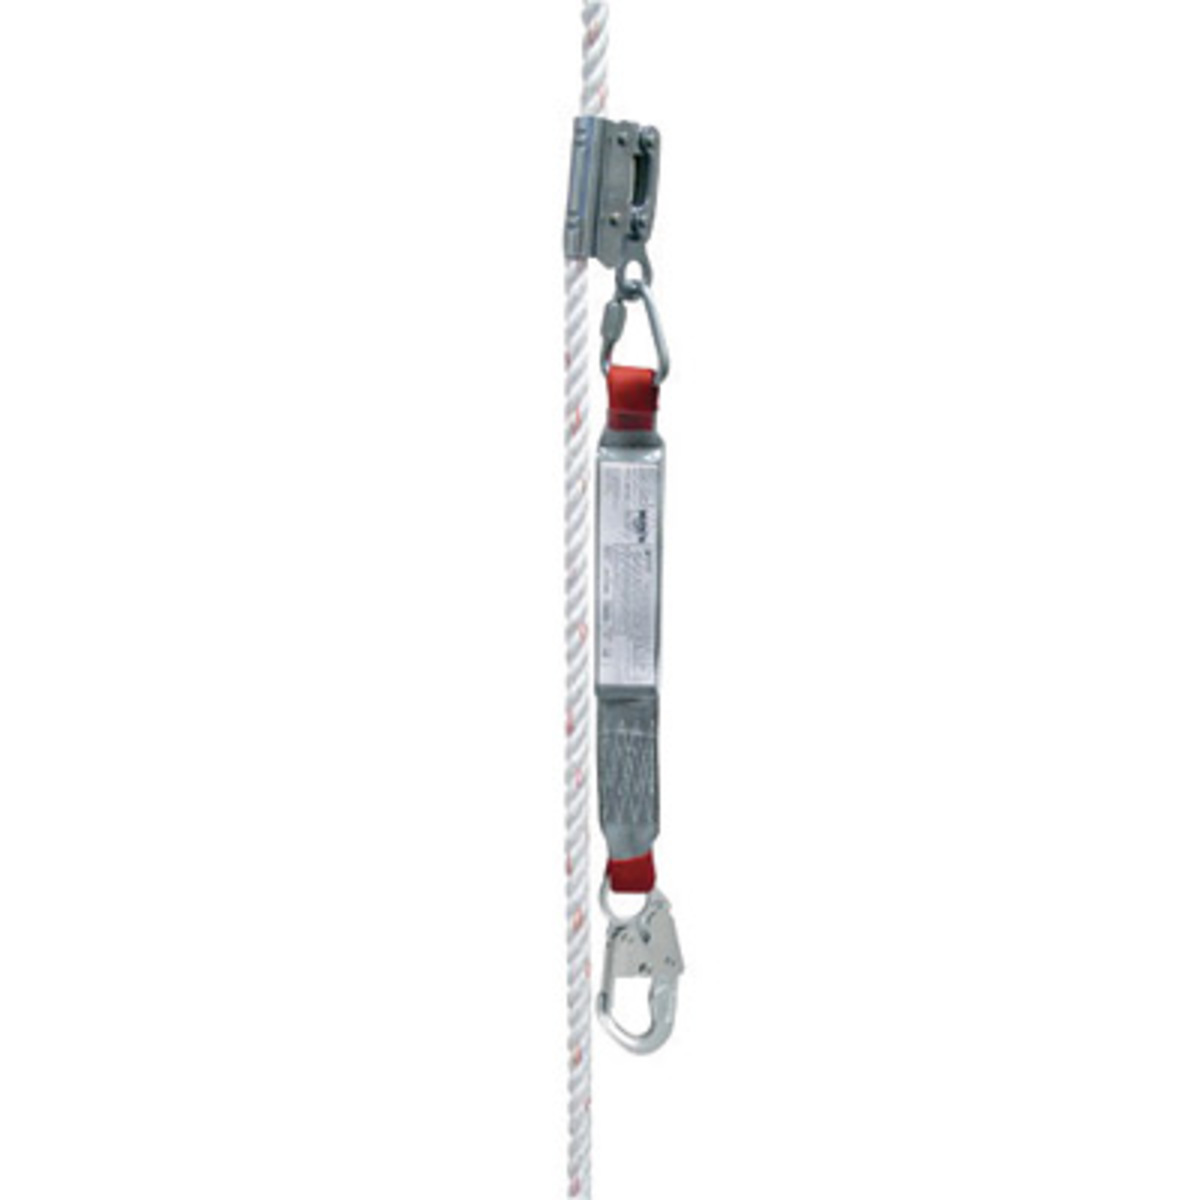 3M™ DBI-SALA® PROTECTA® PRO™ Manual Synthetic Rope Adjuster With 2' PRO™ Shock Absorbing Lanyard